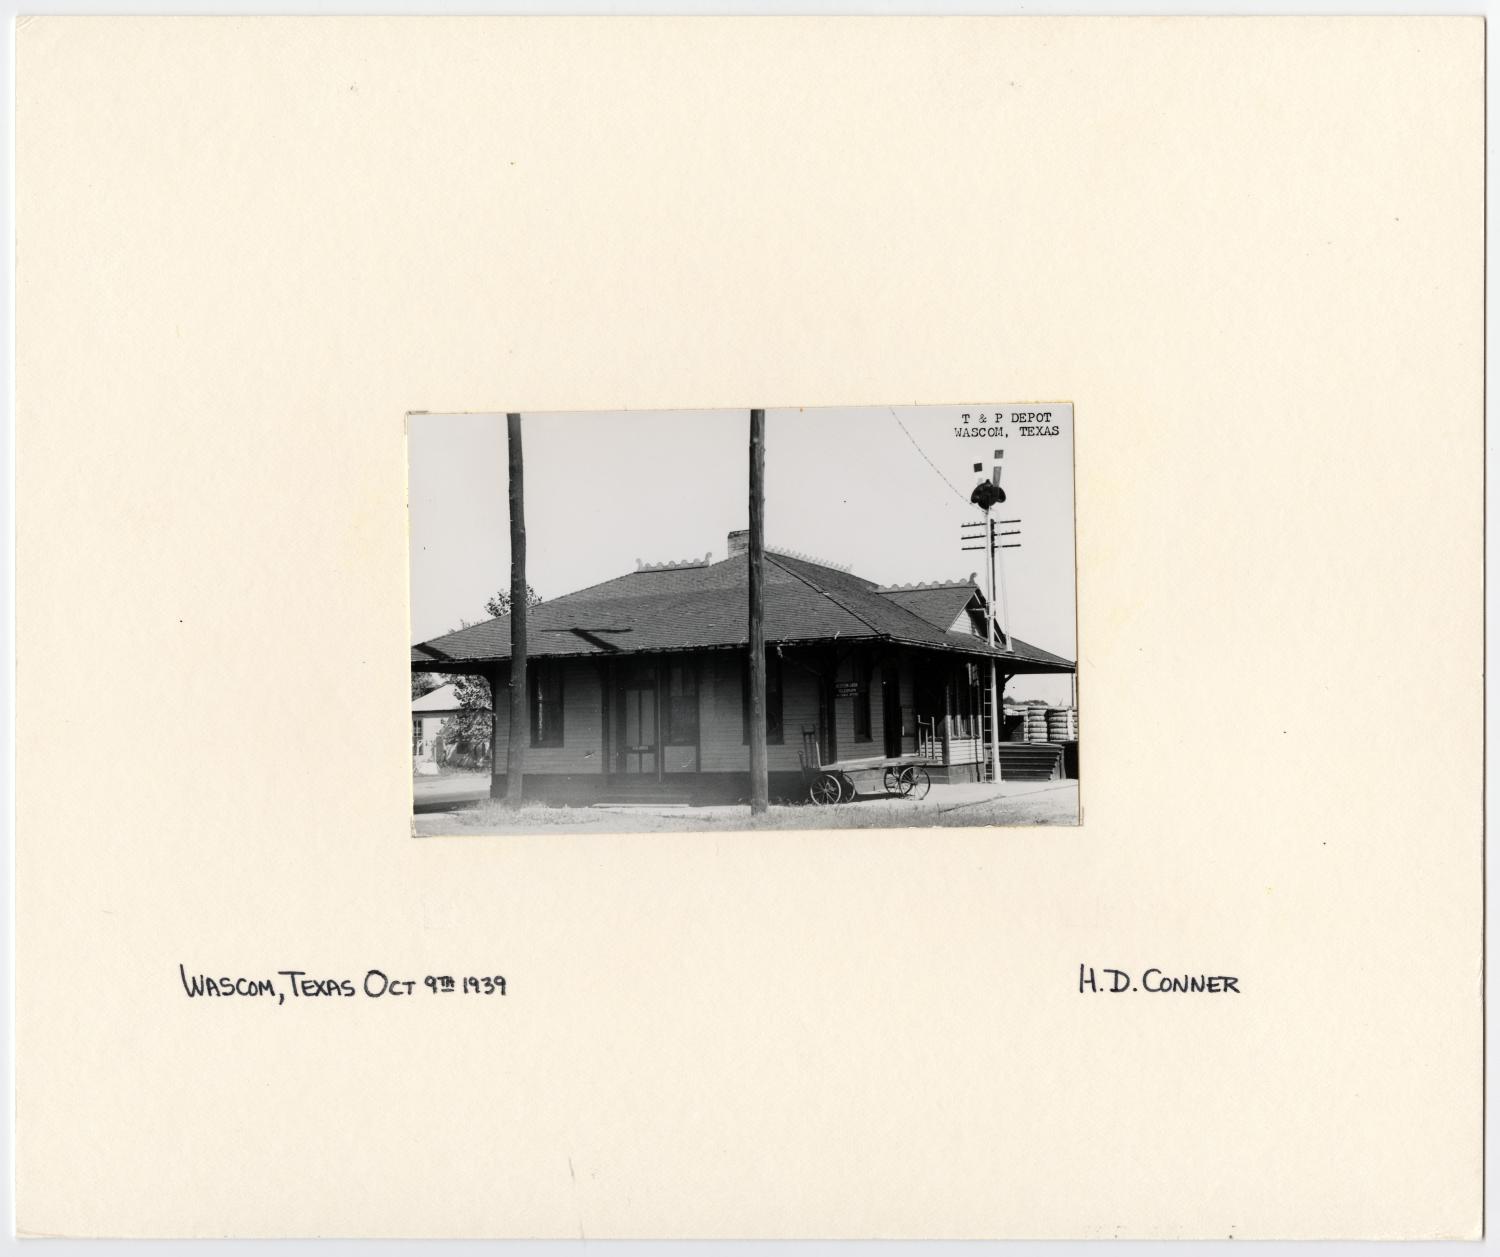 Images of Texas & Pacific Stations and Structures in  Waskom, TX